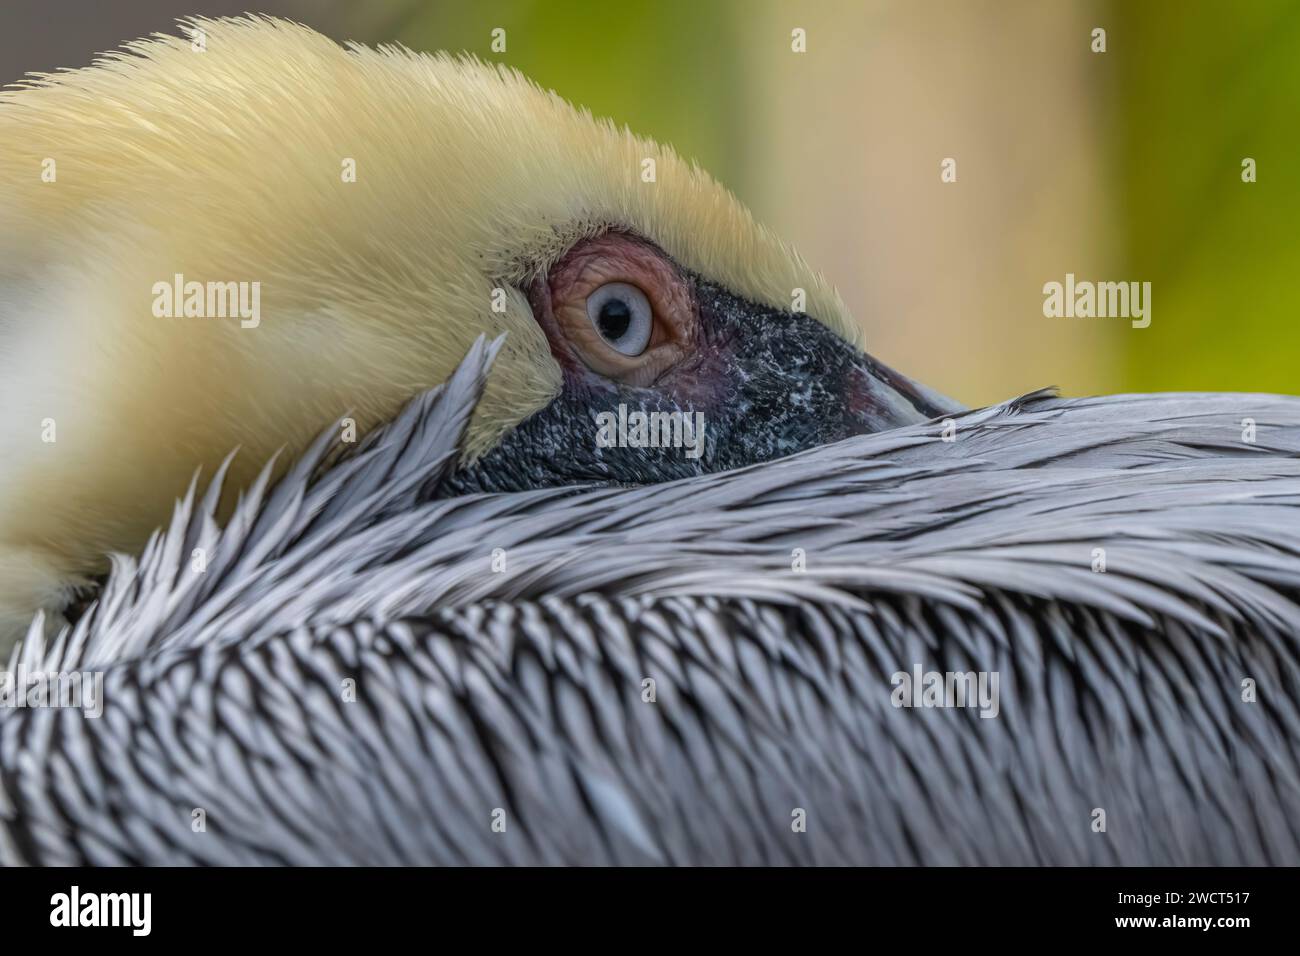 The head of a pelican, showcasing its beautiful white feathers and captivating eyes. Stock Photo